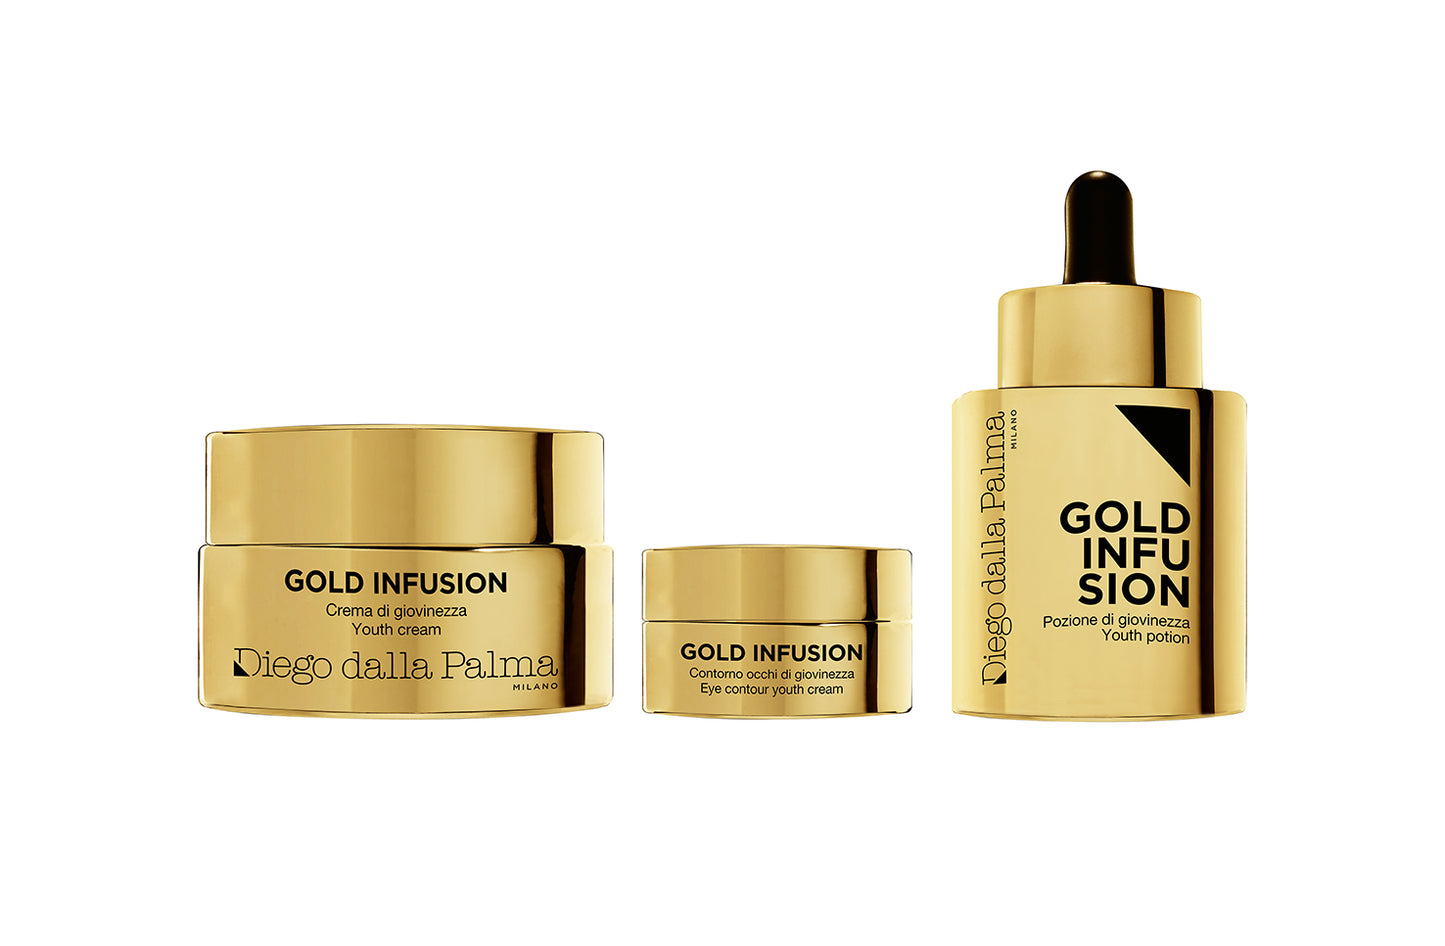 GOLD INFUSION SERUM - YOUTH POTION